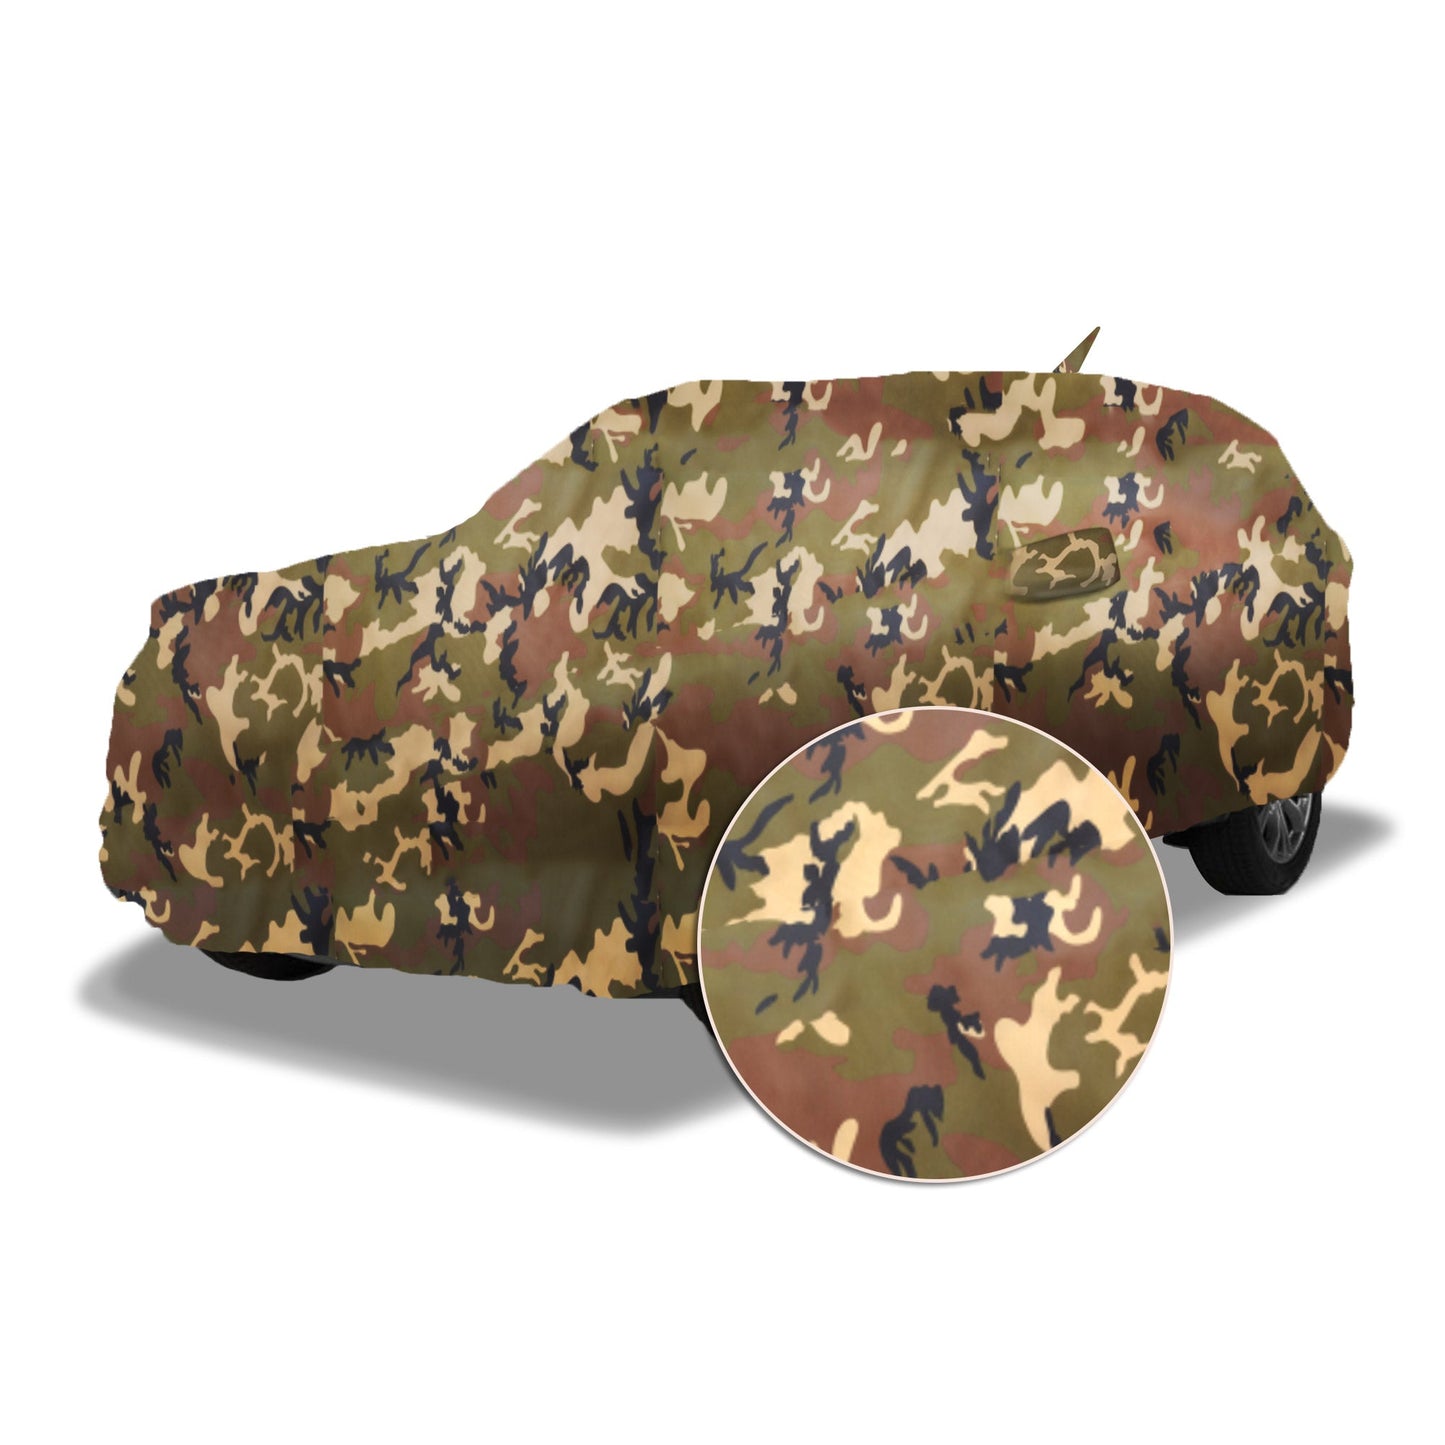 Ascot Mahindra Bolero Car Body Cover Extra Strong & Dust Proof Jungle Military Car Cover with UV Proof & Water-Resistant Coating